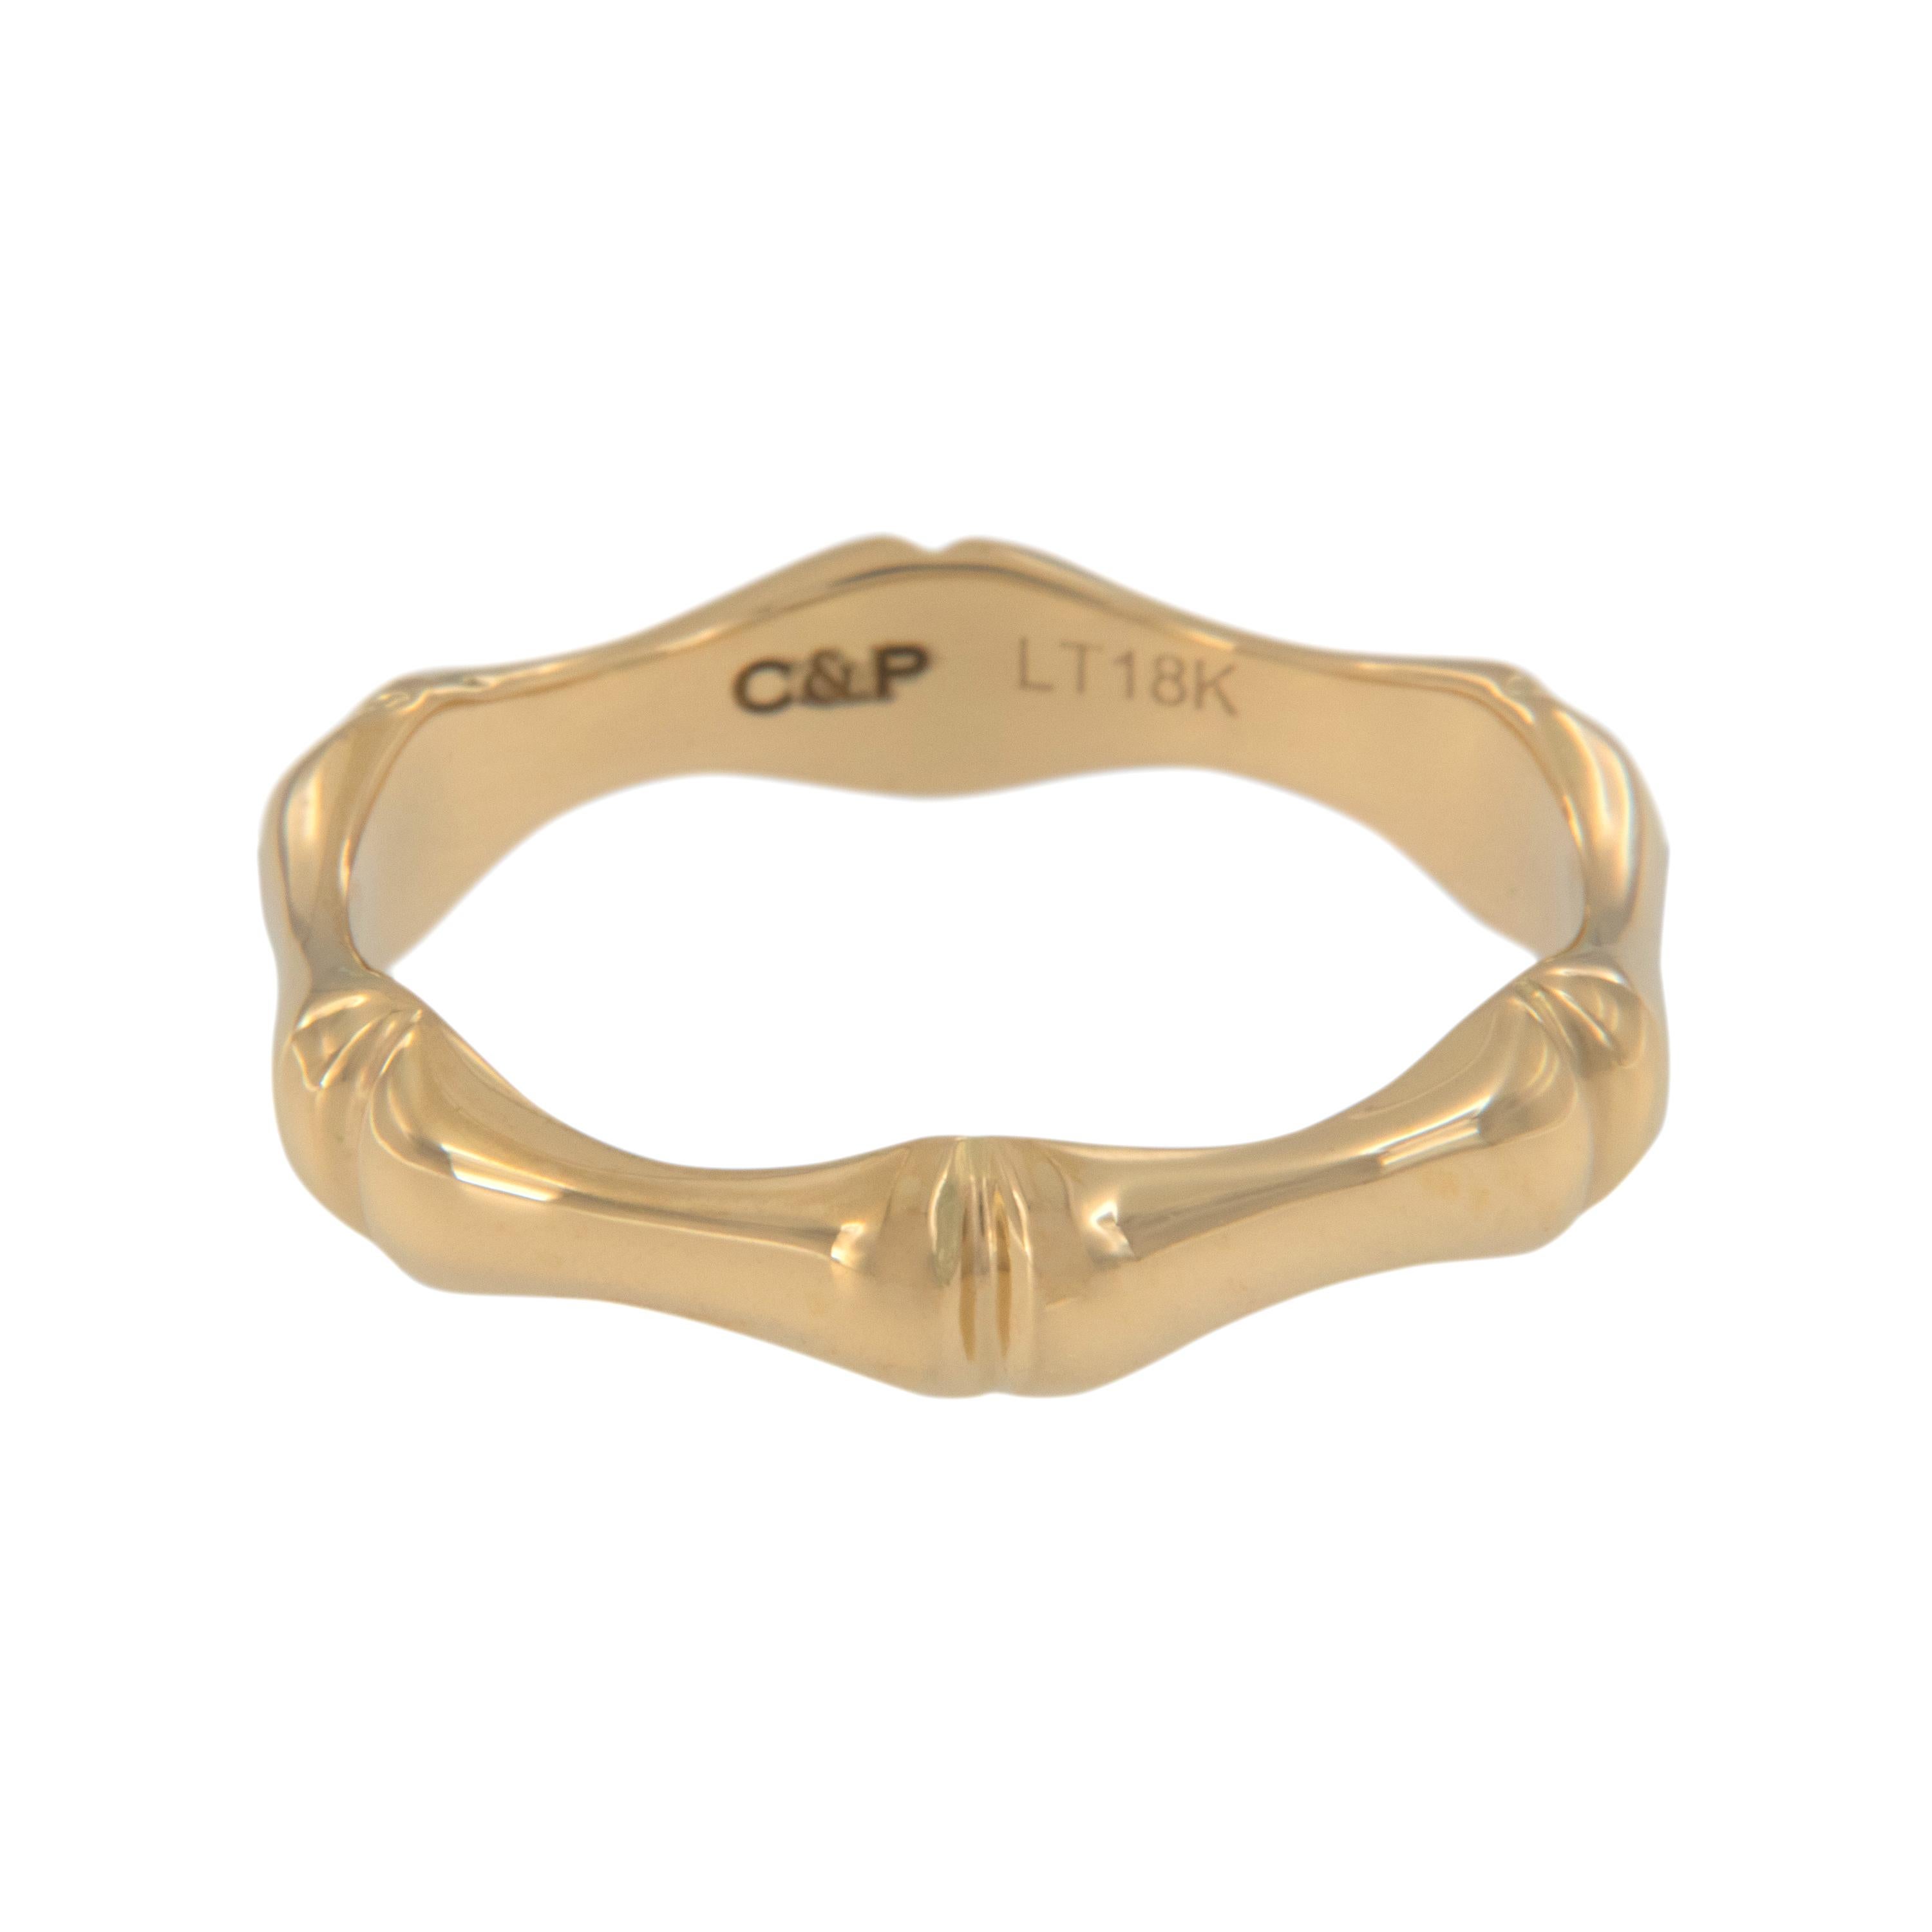 18 karat yellow gold bamboo band in a size 7,  3.85-2.22mm wide
In Chinese culture, bamboo symbolizes strength, acceptance of the natural flow, continuous growth and openness to wisdom. What better way to be mindful of these attributes than wearing